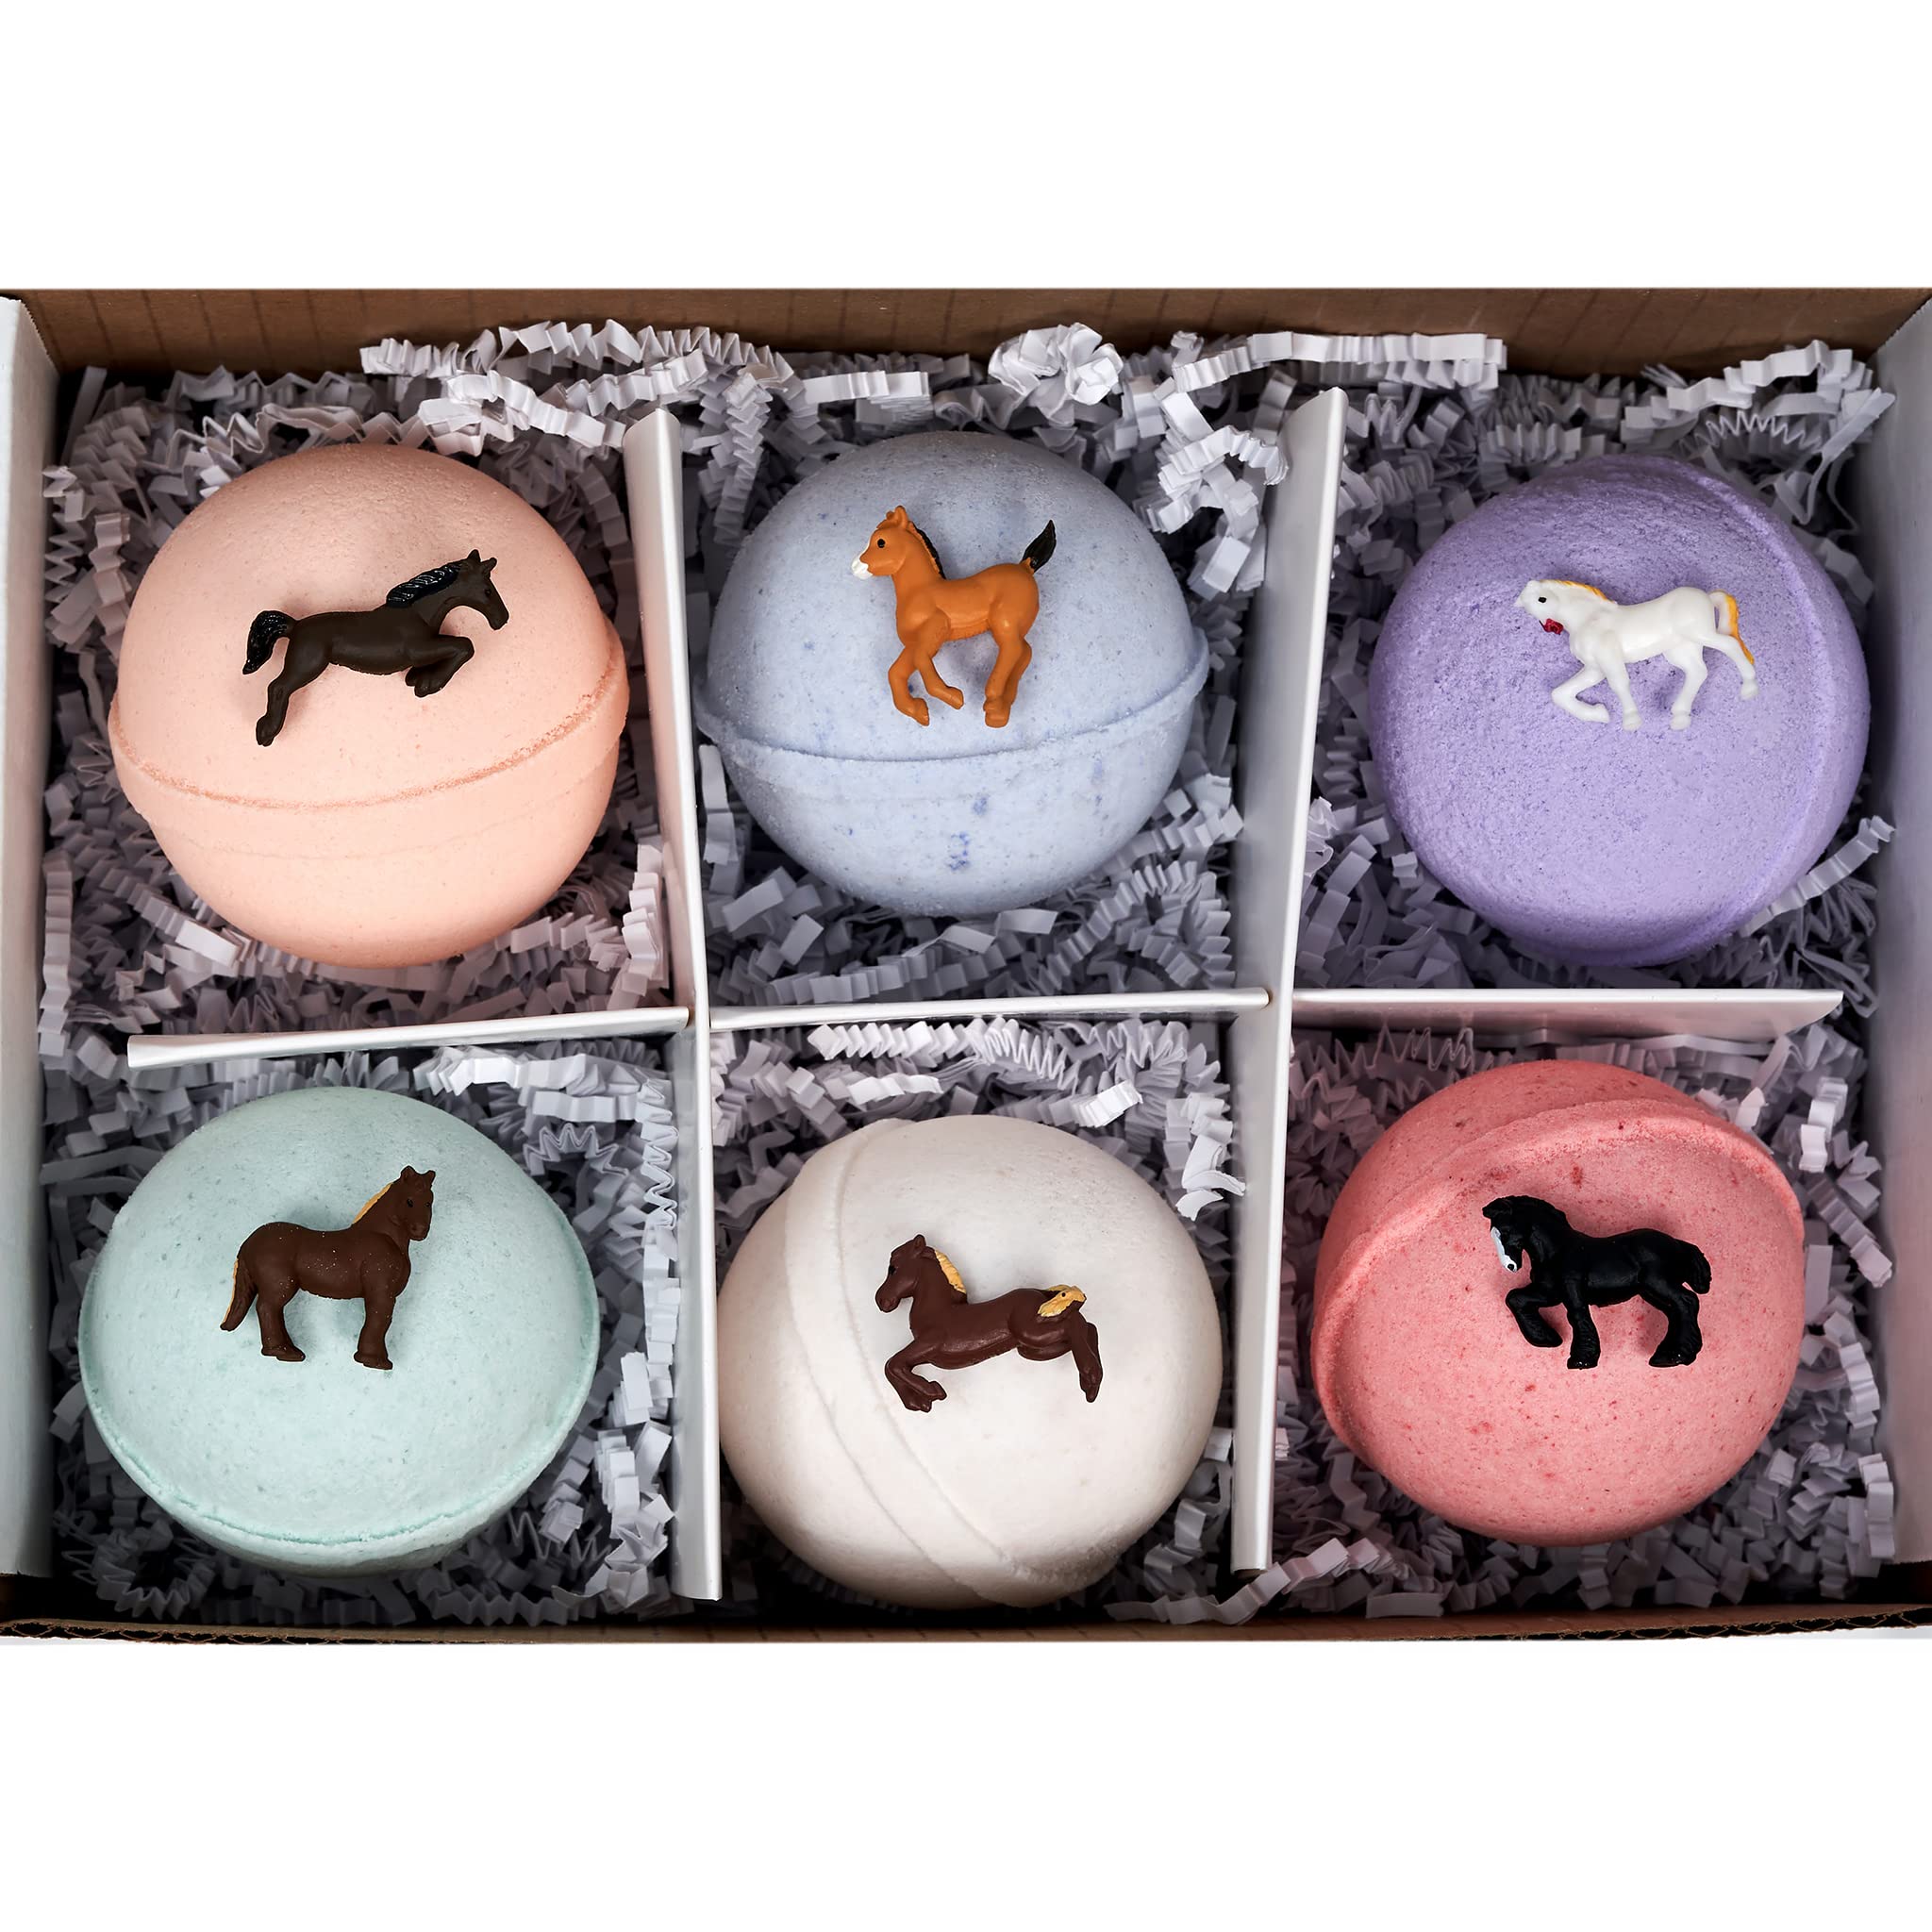 SPAPURE Wild Horses Bath Bombs: for Kids with 6 XL Bath Bombs with Surprise Horses Inside, USA Made, Handmade, Natural Bath Bombs, Birthday Gift idea for Kids, Spa Parties